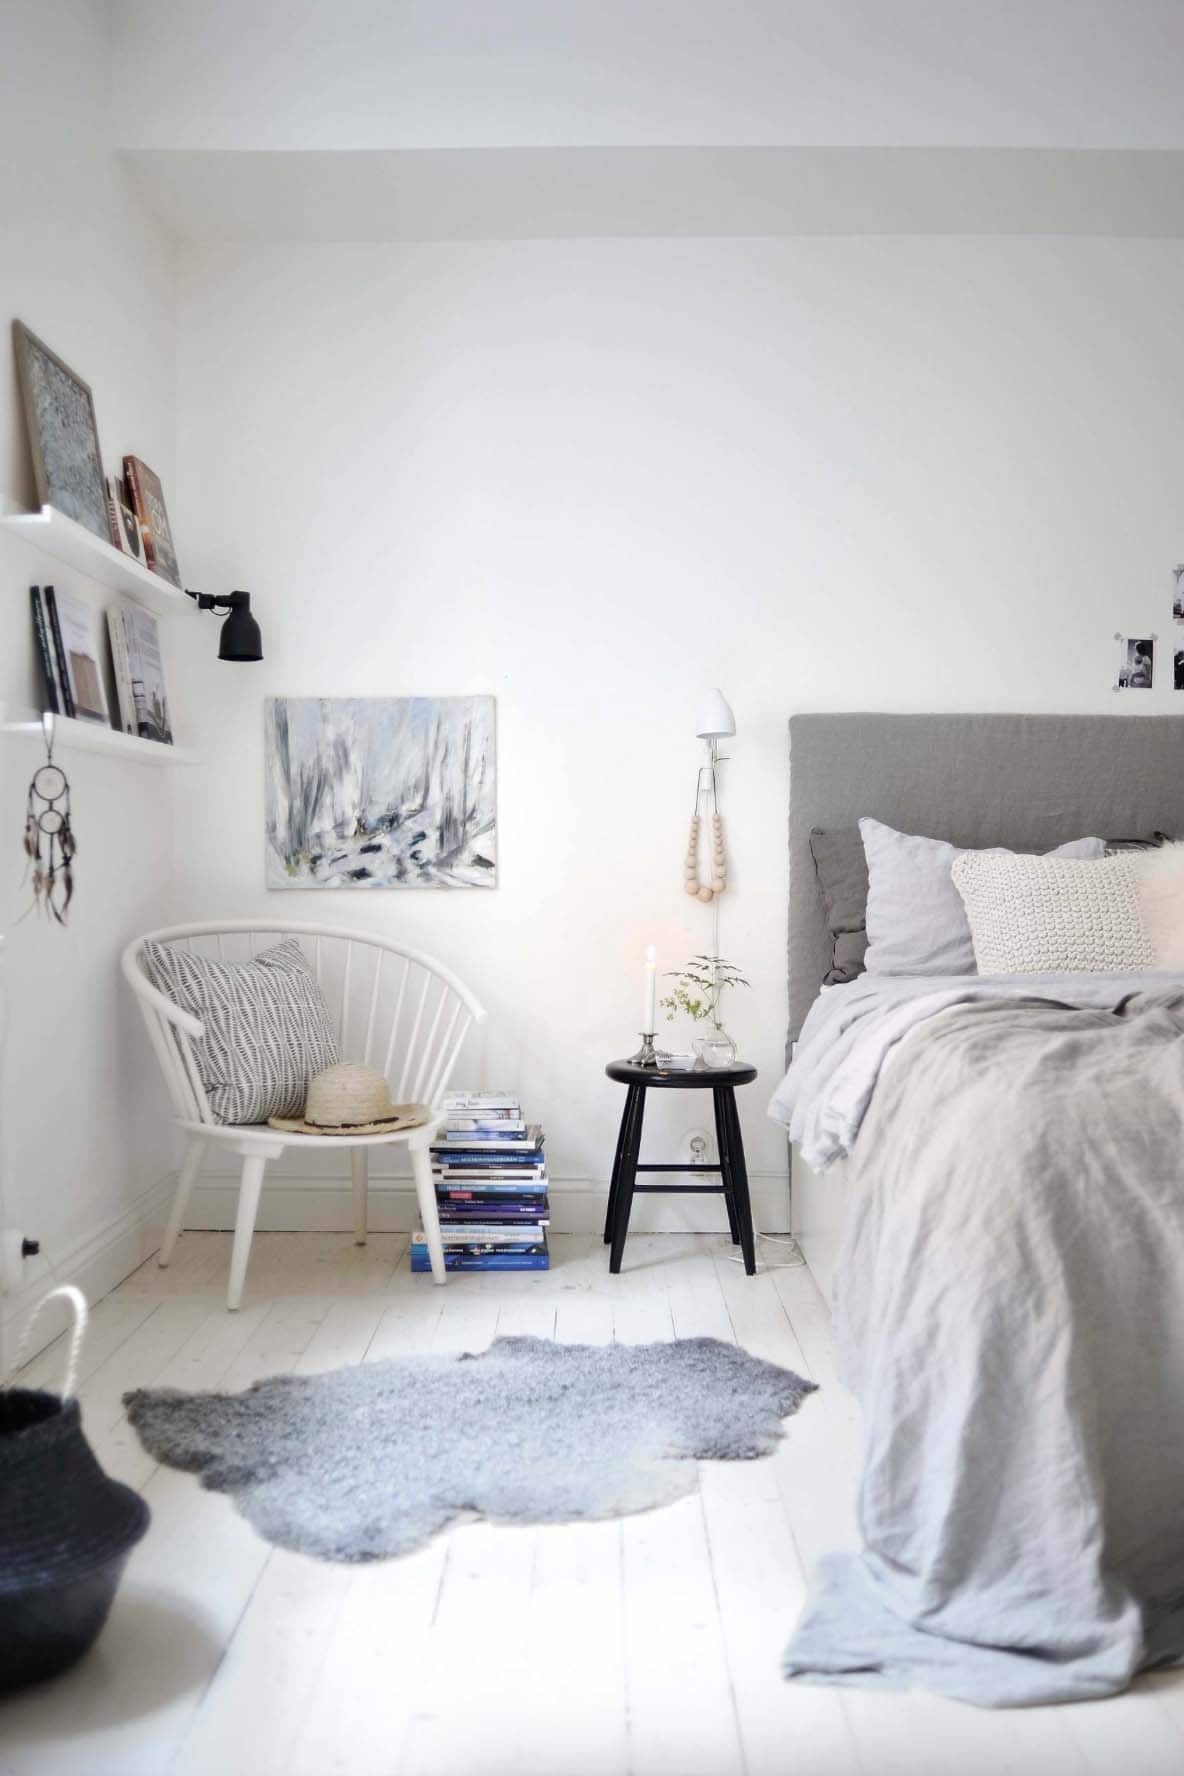 Scandinavian style bedroom with layers of bedding and wall shelves